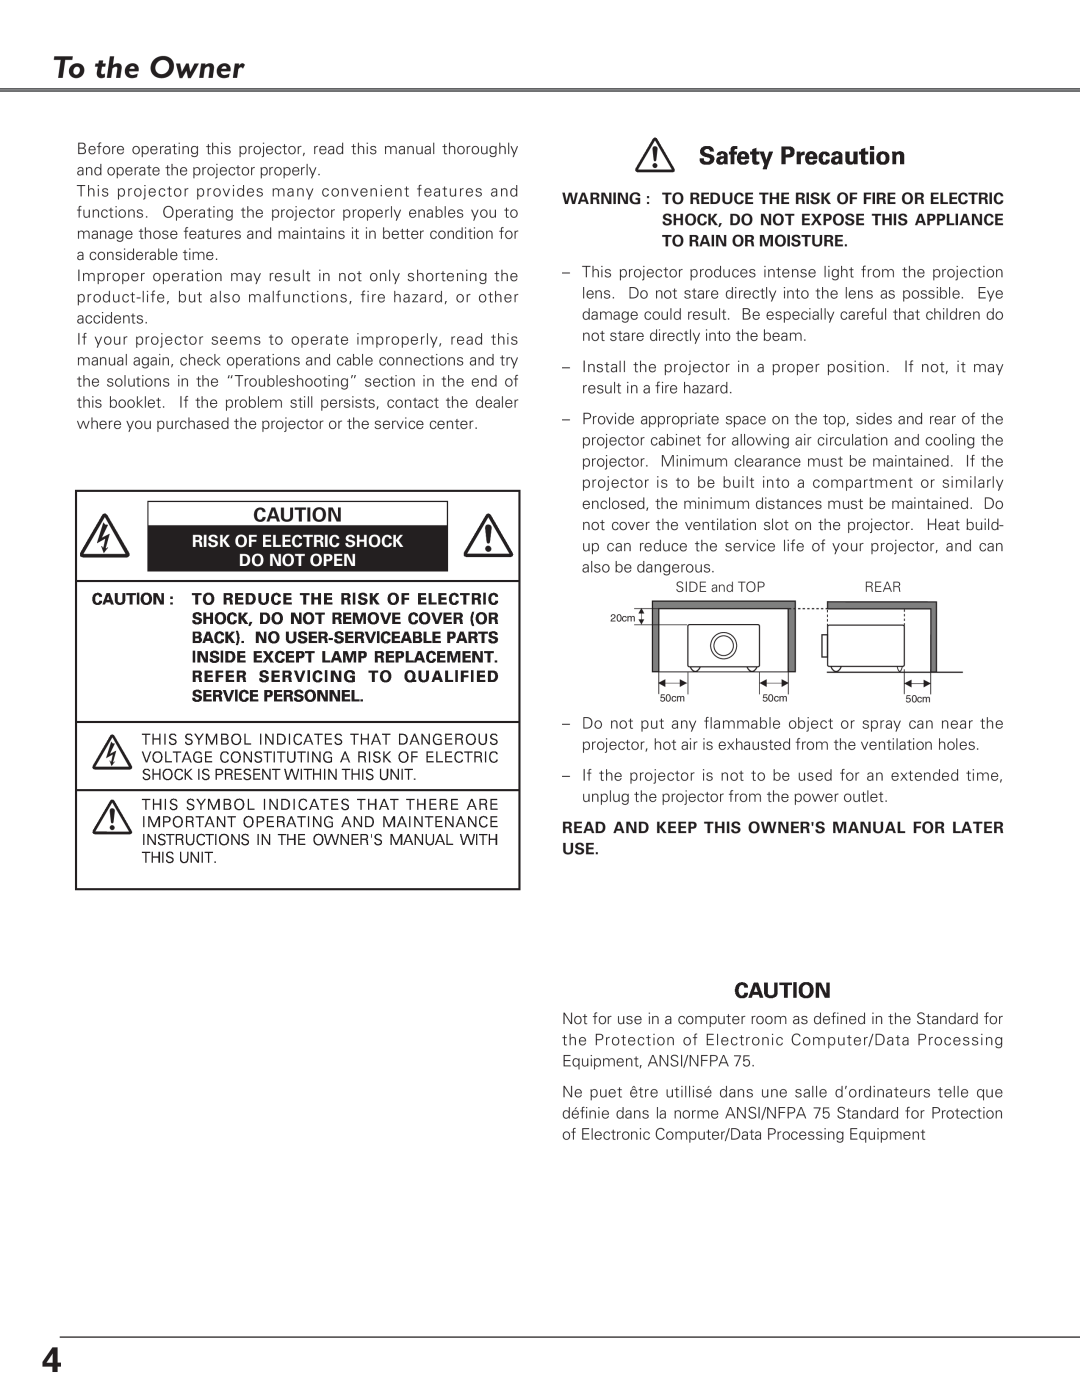 Eiki LC-XB26, LC-XB21 owner manual To the Owner, Safety Precaution, Risk Of Electric Shock Do Not Open 